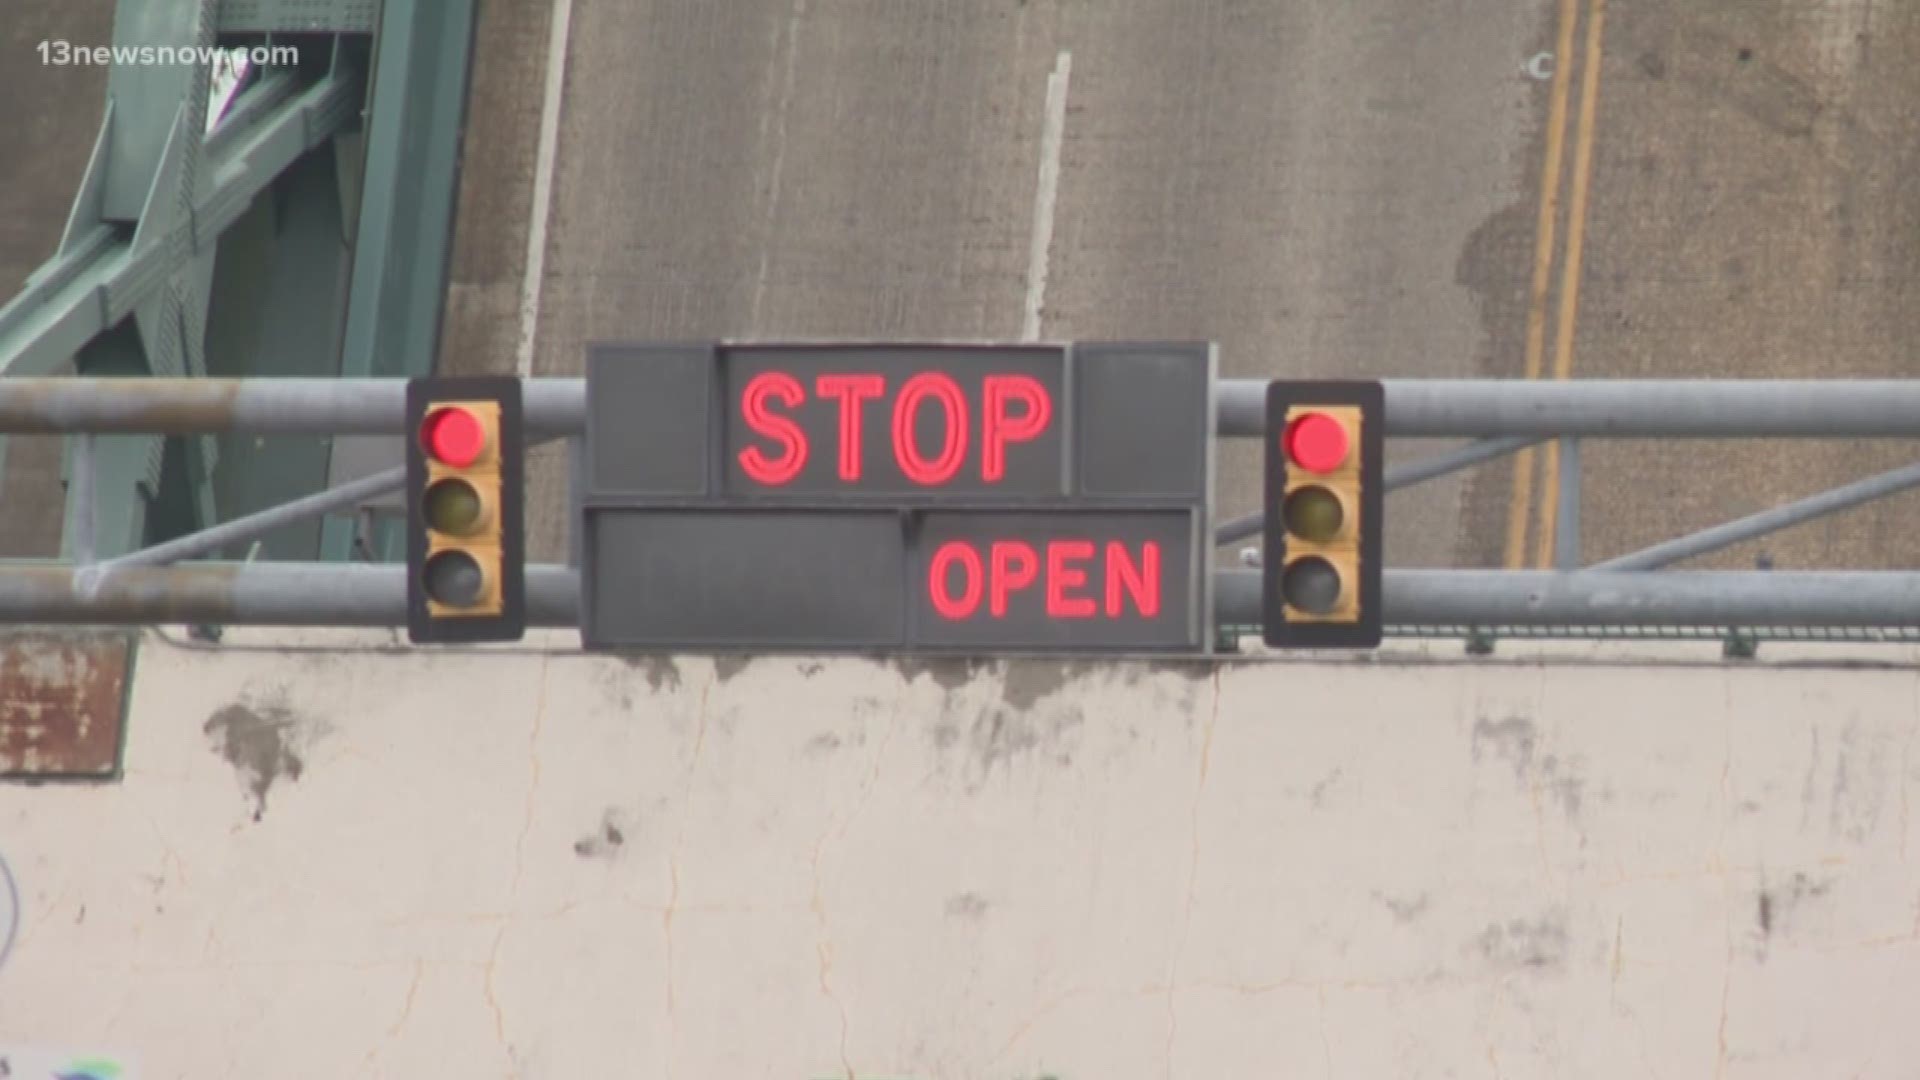 After a glitch prevented the Great Bridge Bridge from closing, the traffic pains from the Centerville Turnpike Bridge were really felt Thursday. Officials have been trying to mitigate the traffic from that closure.